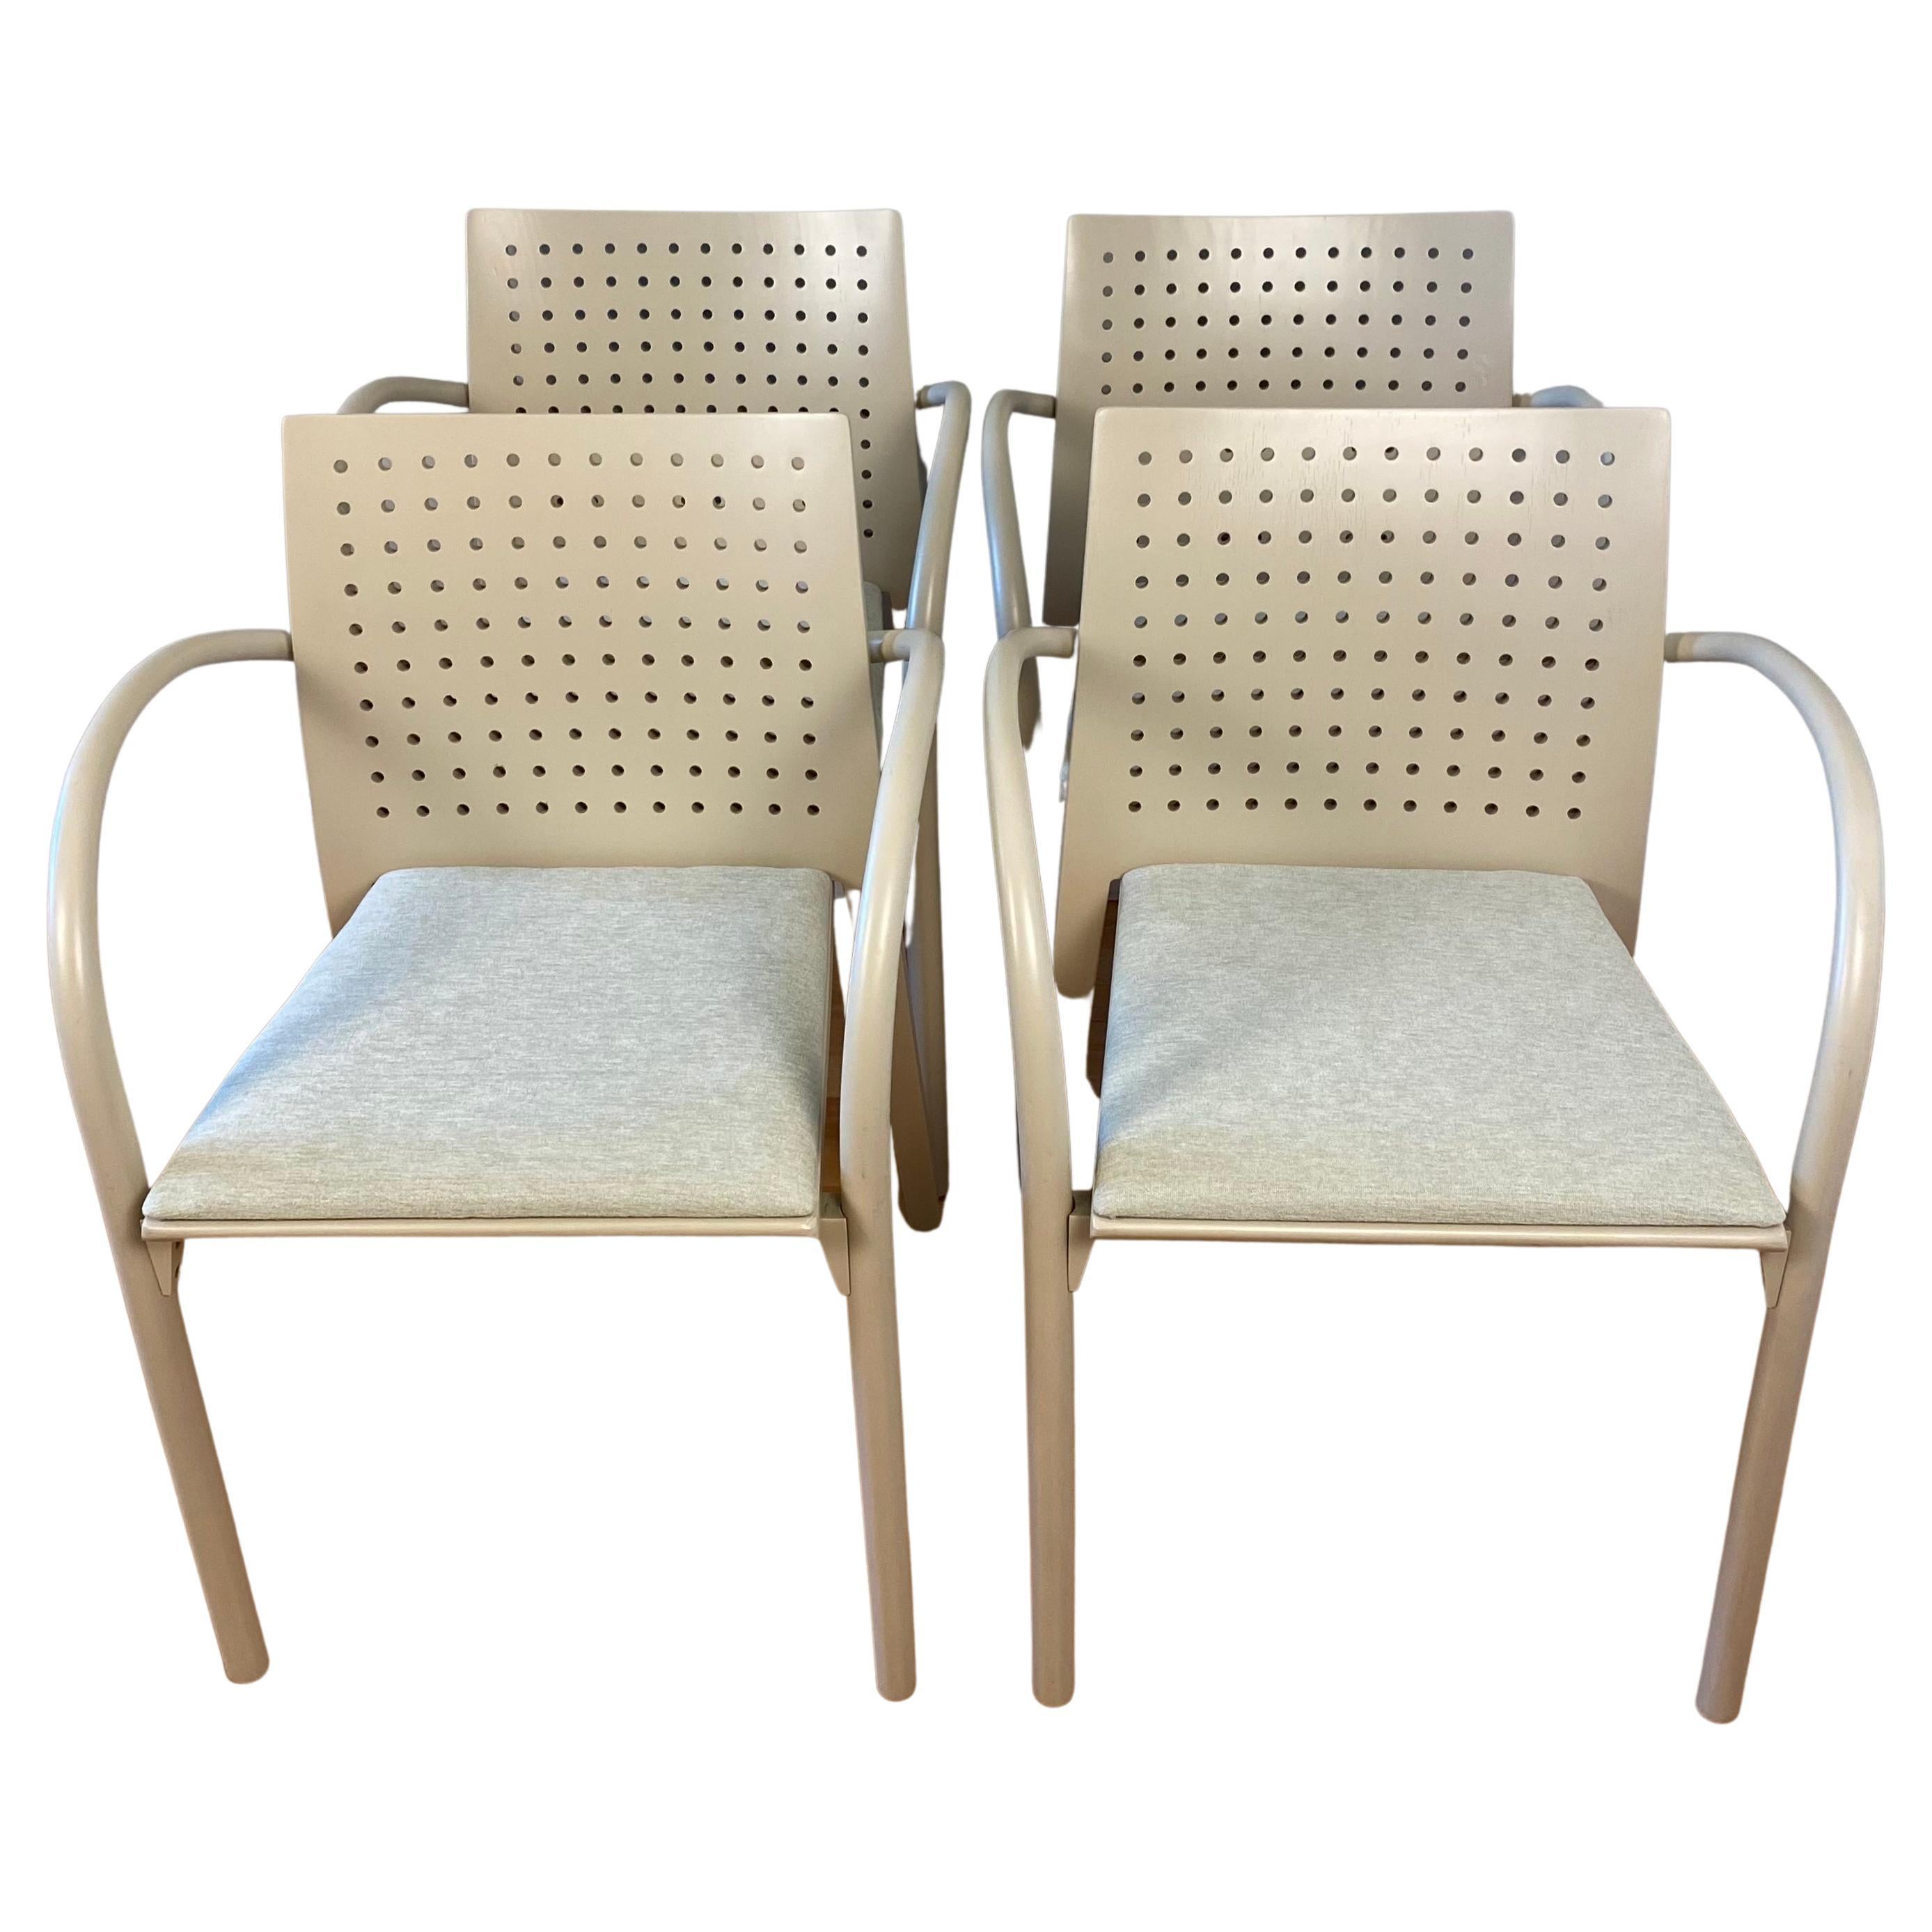 Set of 4 Mid-Century Dining Chairs by Thonet